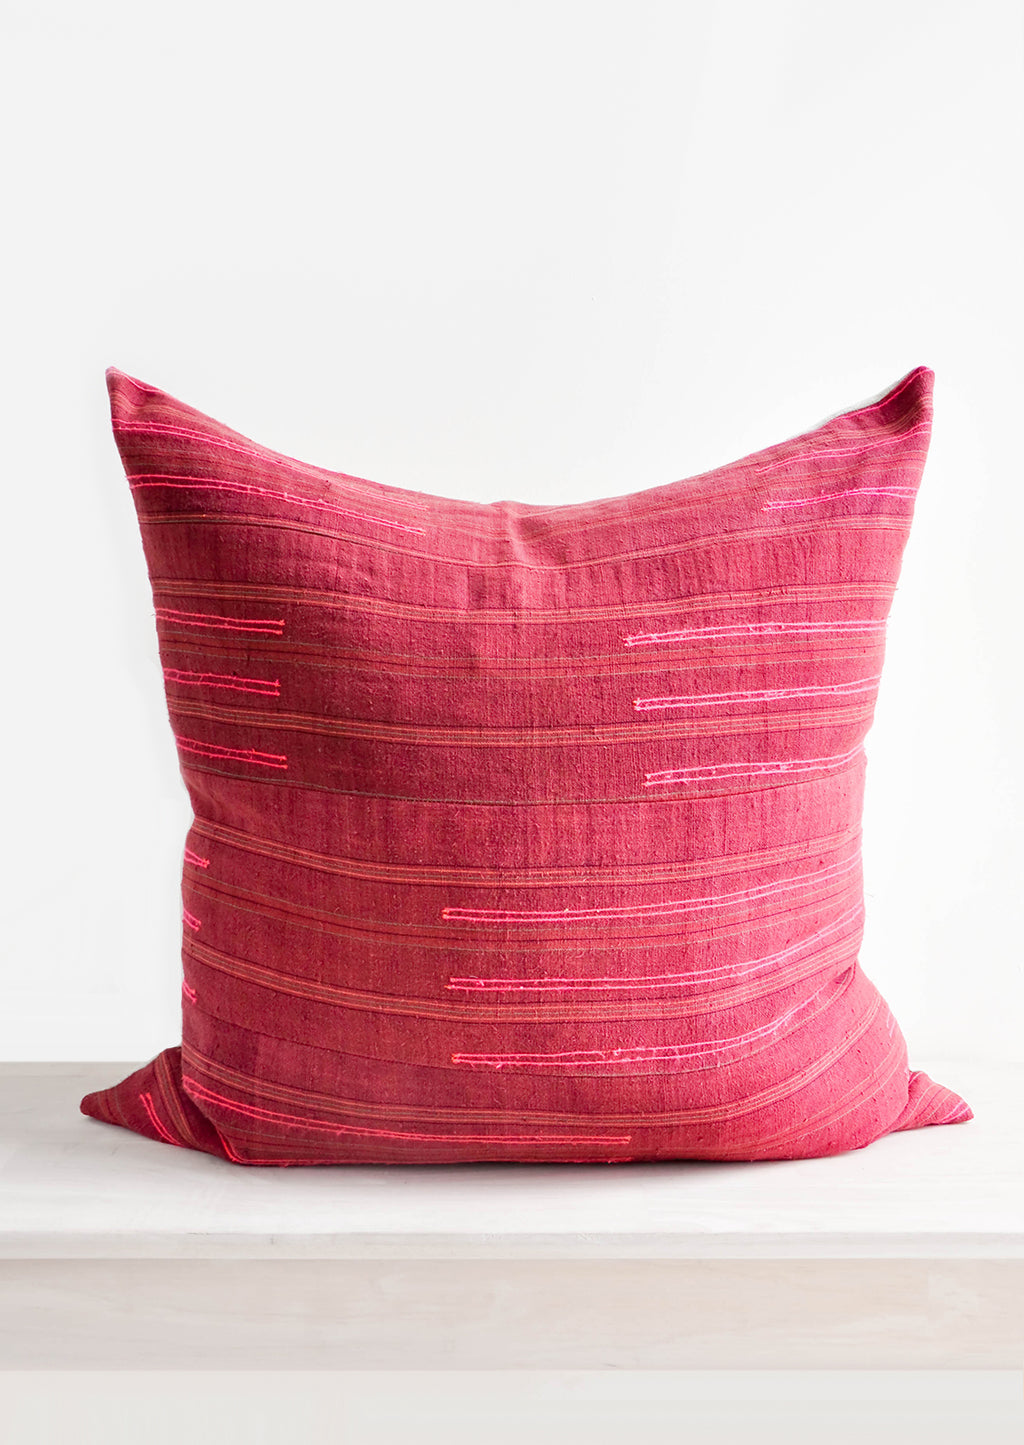 1: Wine Colored Recycled Thai Fabric Square Throw Pillow with Hot Pink Embroidery Detailing